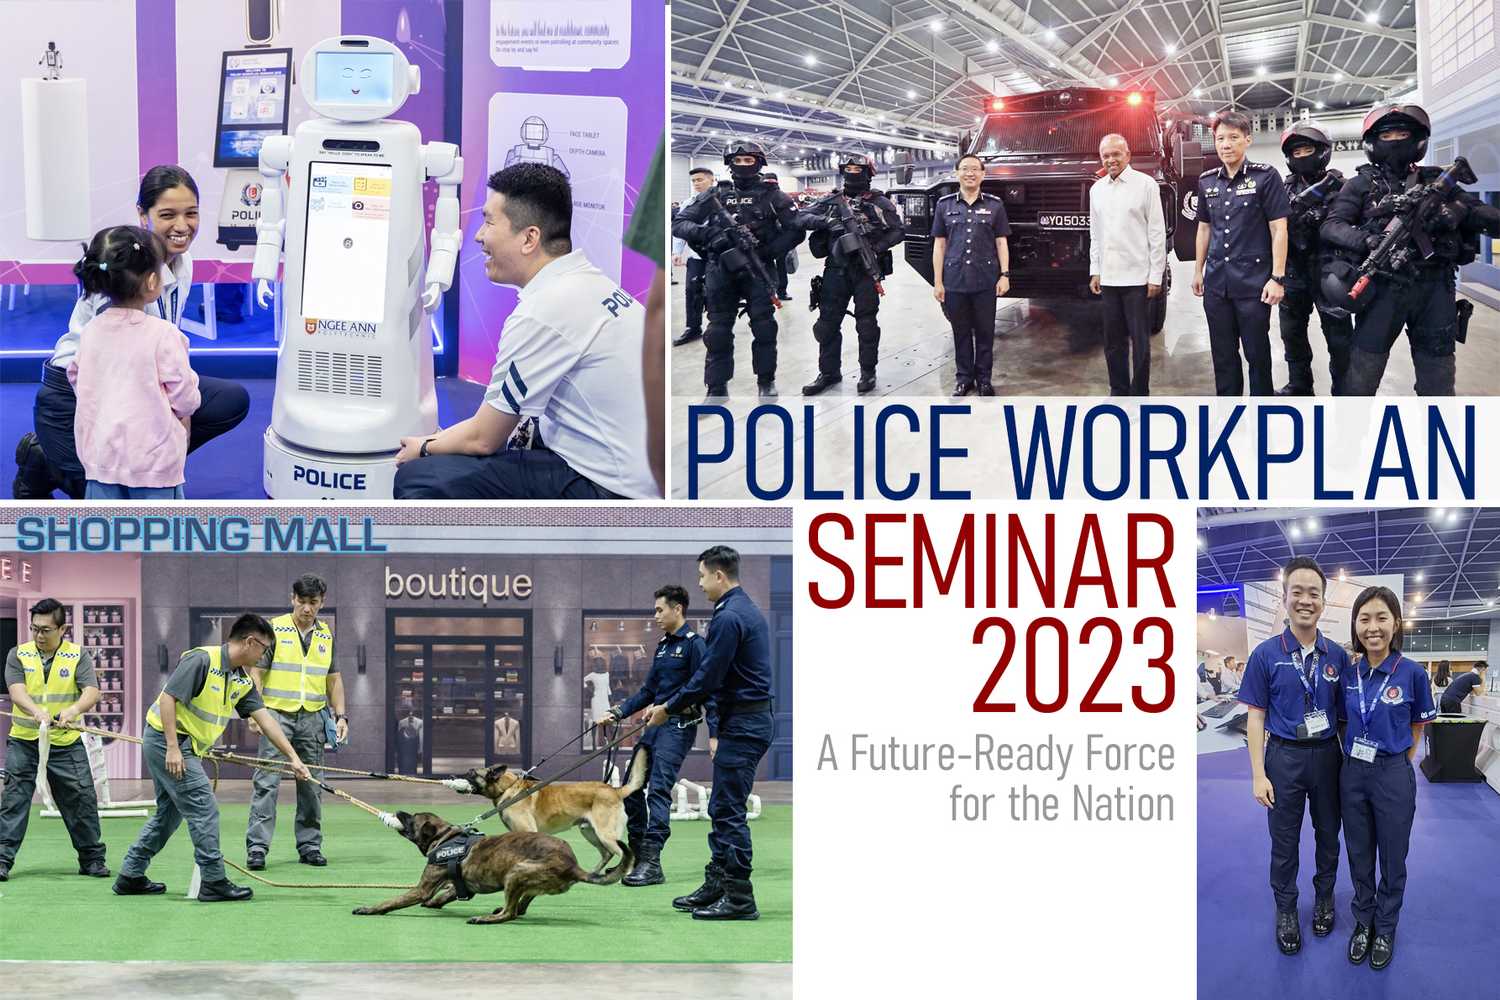 A collage of photos from the Police Workplan Seminar 2023